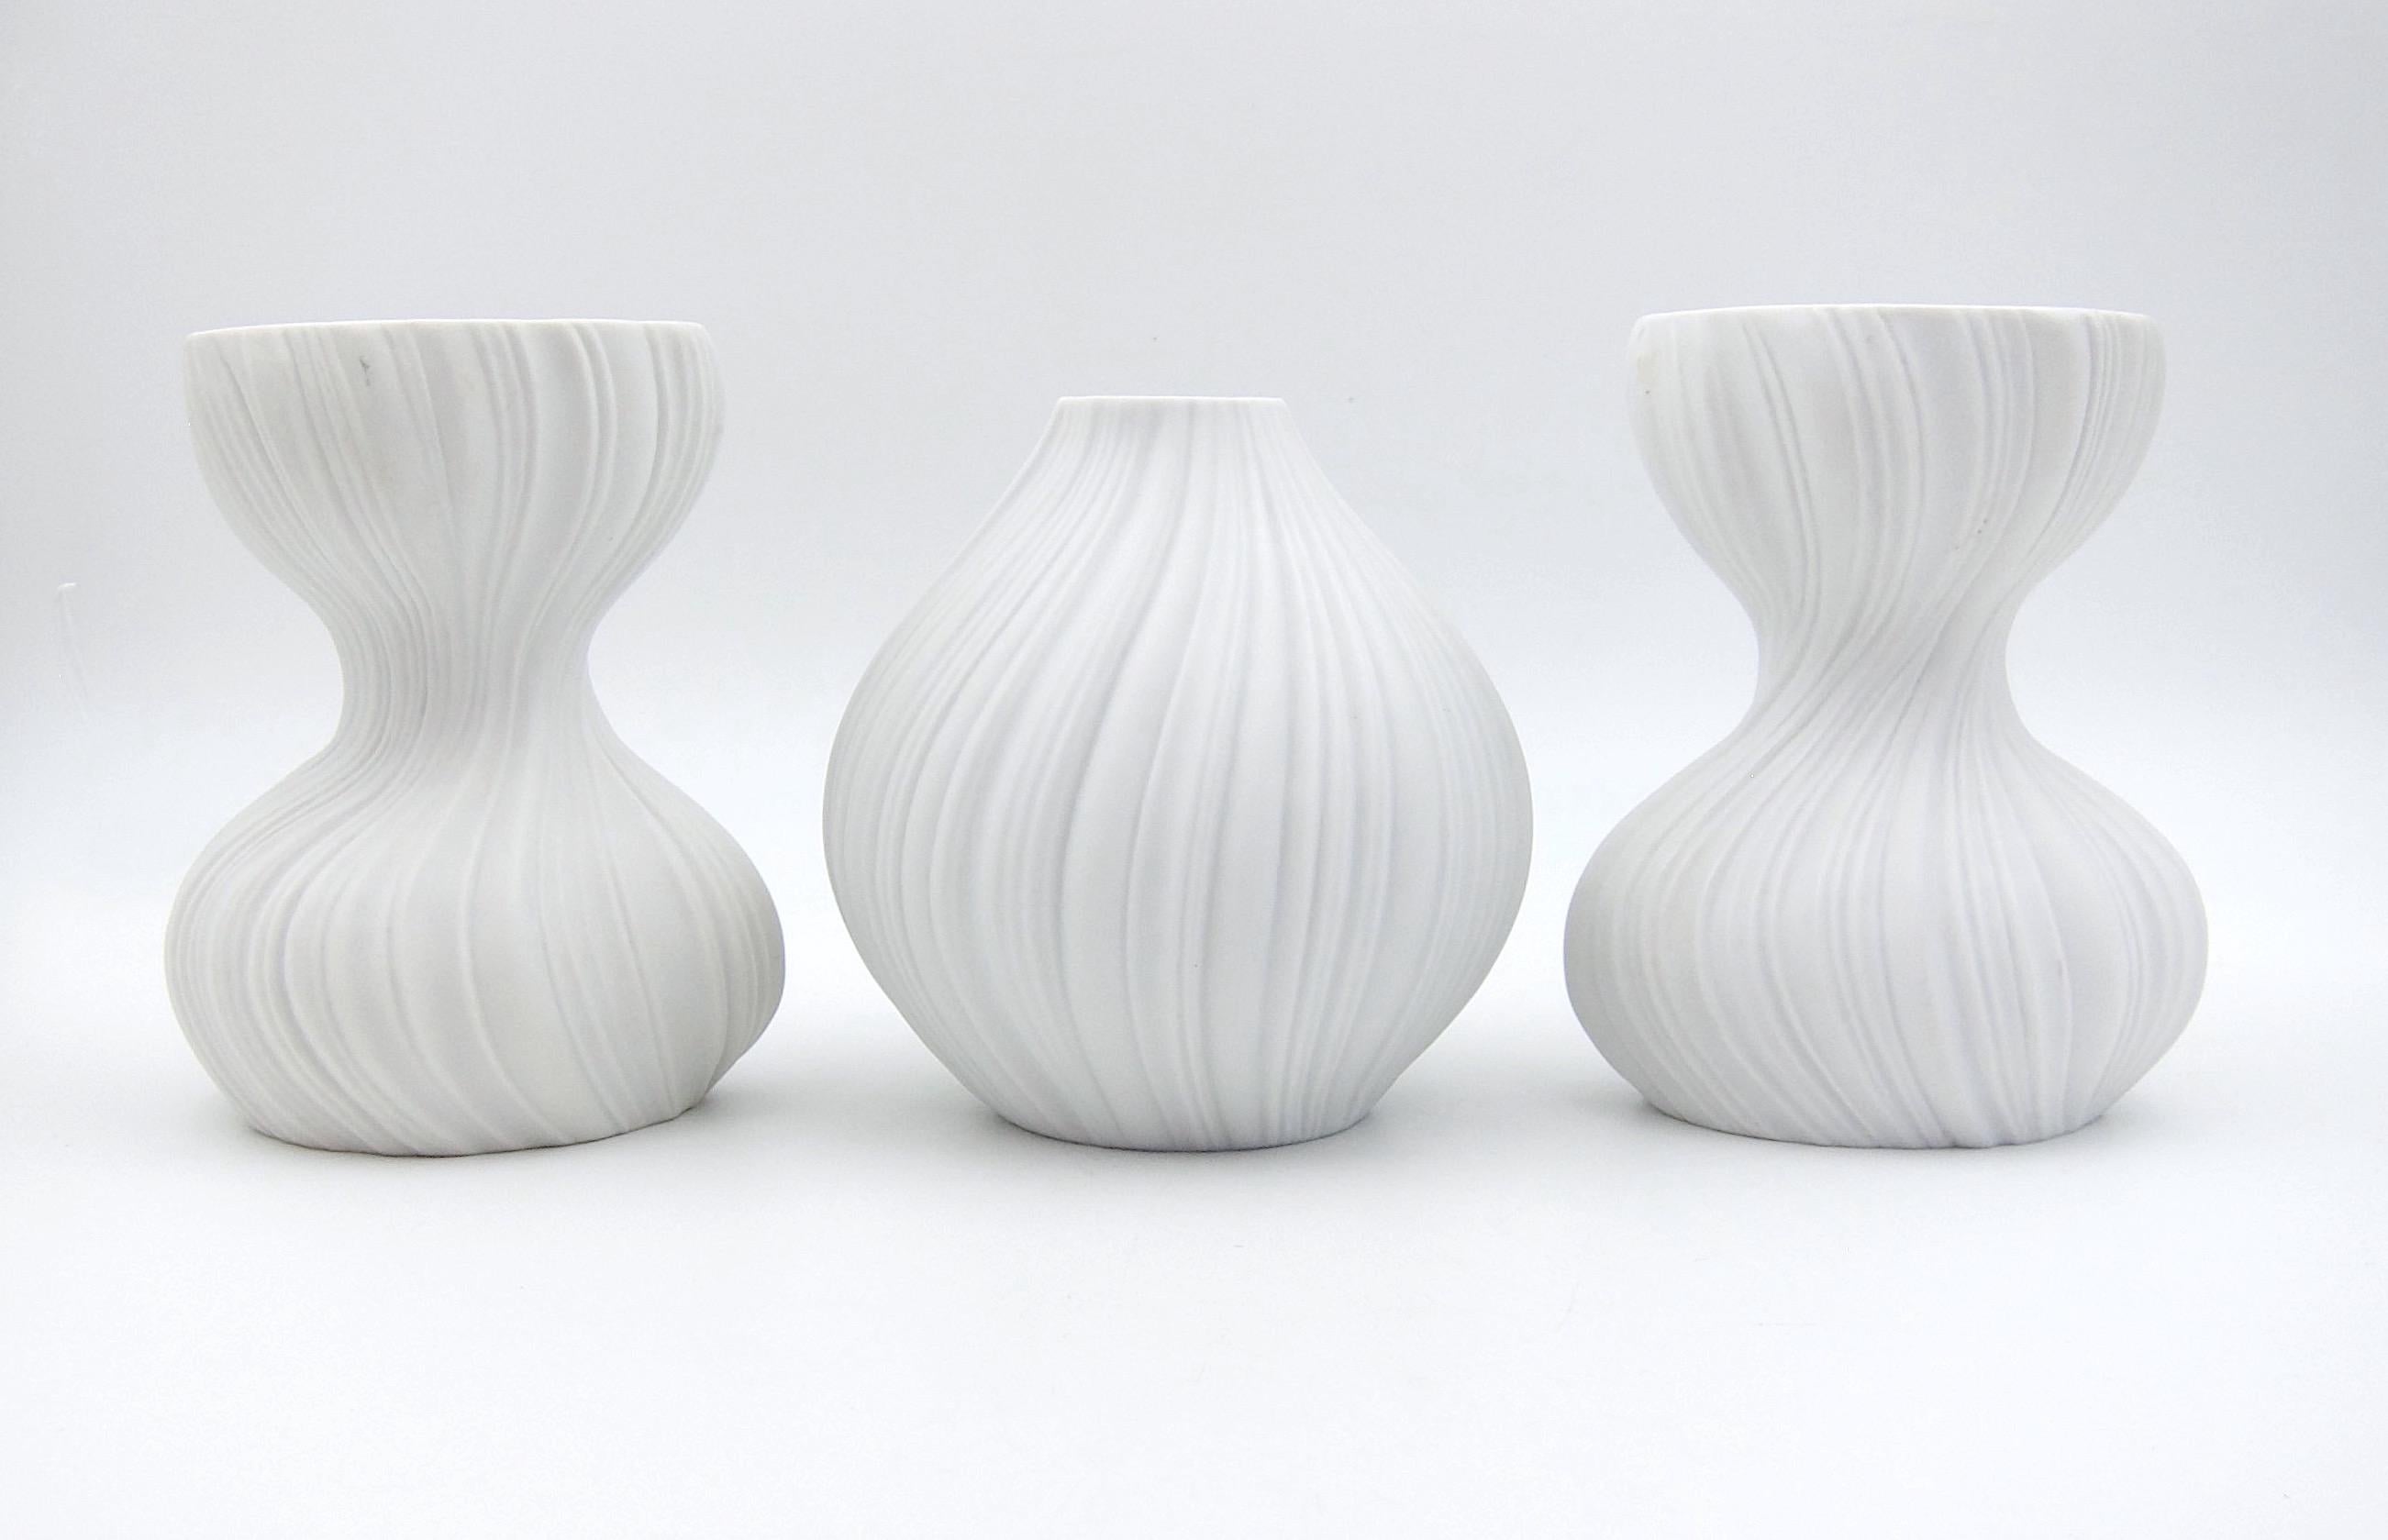 A vintage vase with matching candle holders in white porcelain designed by Martin Freyer (1909-1975) for the Rosenthal Porcelain Factory of Germany in the late 1960s. The modern design was called Plissée [pleated] after the crisp lines in relief